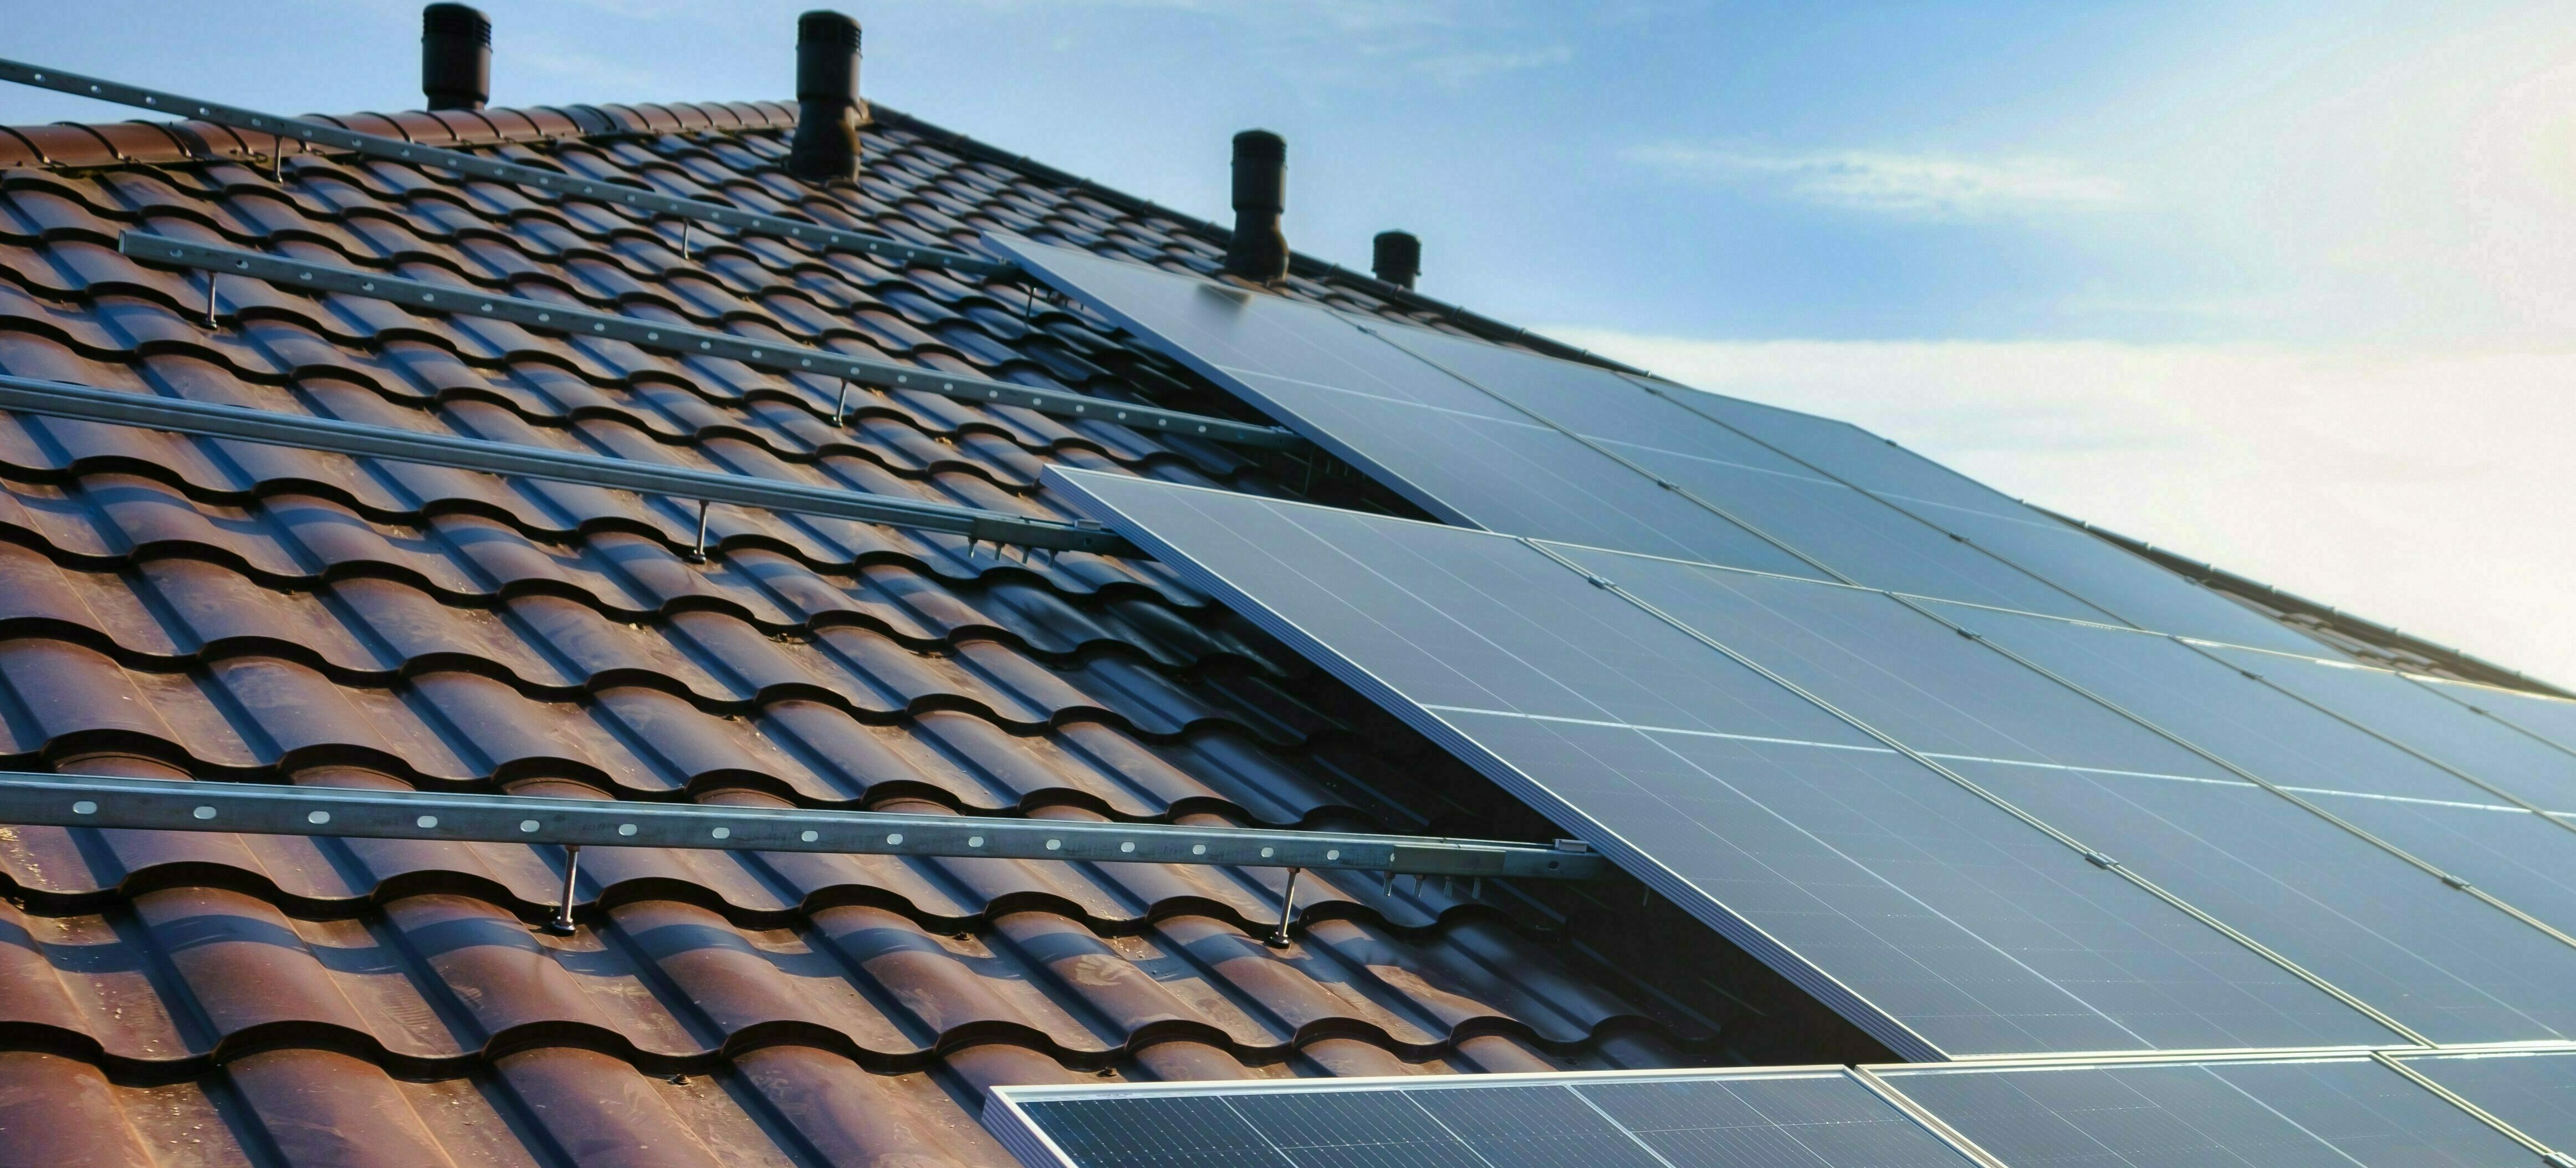 Solar panels attached to roof tiles. Photo